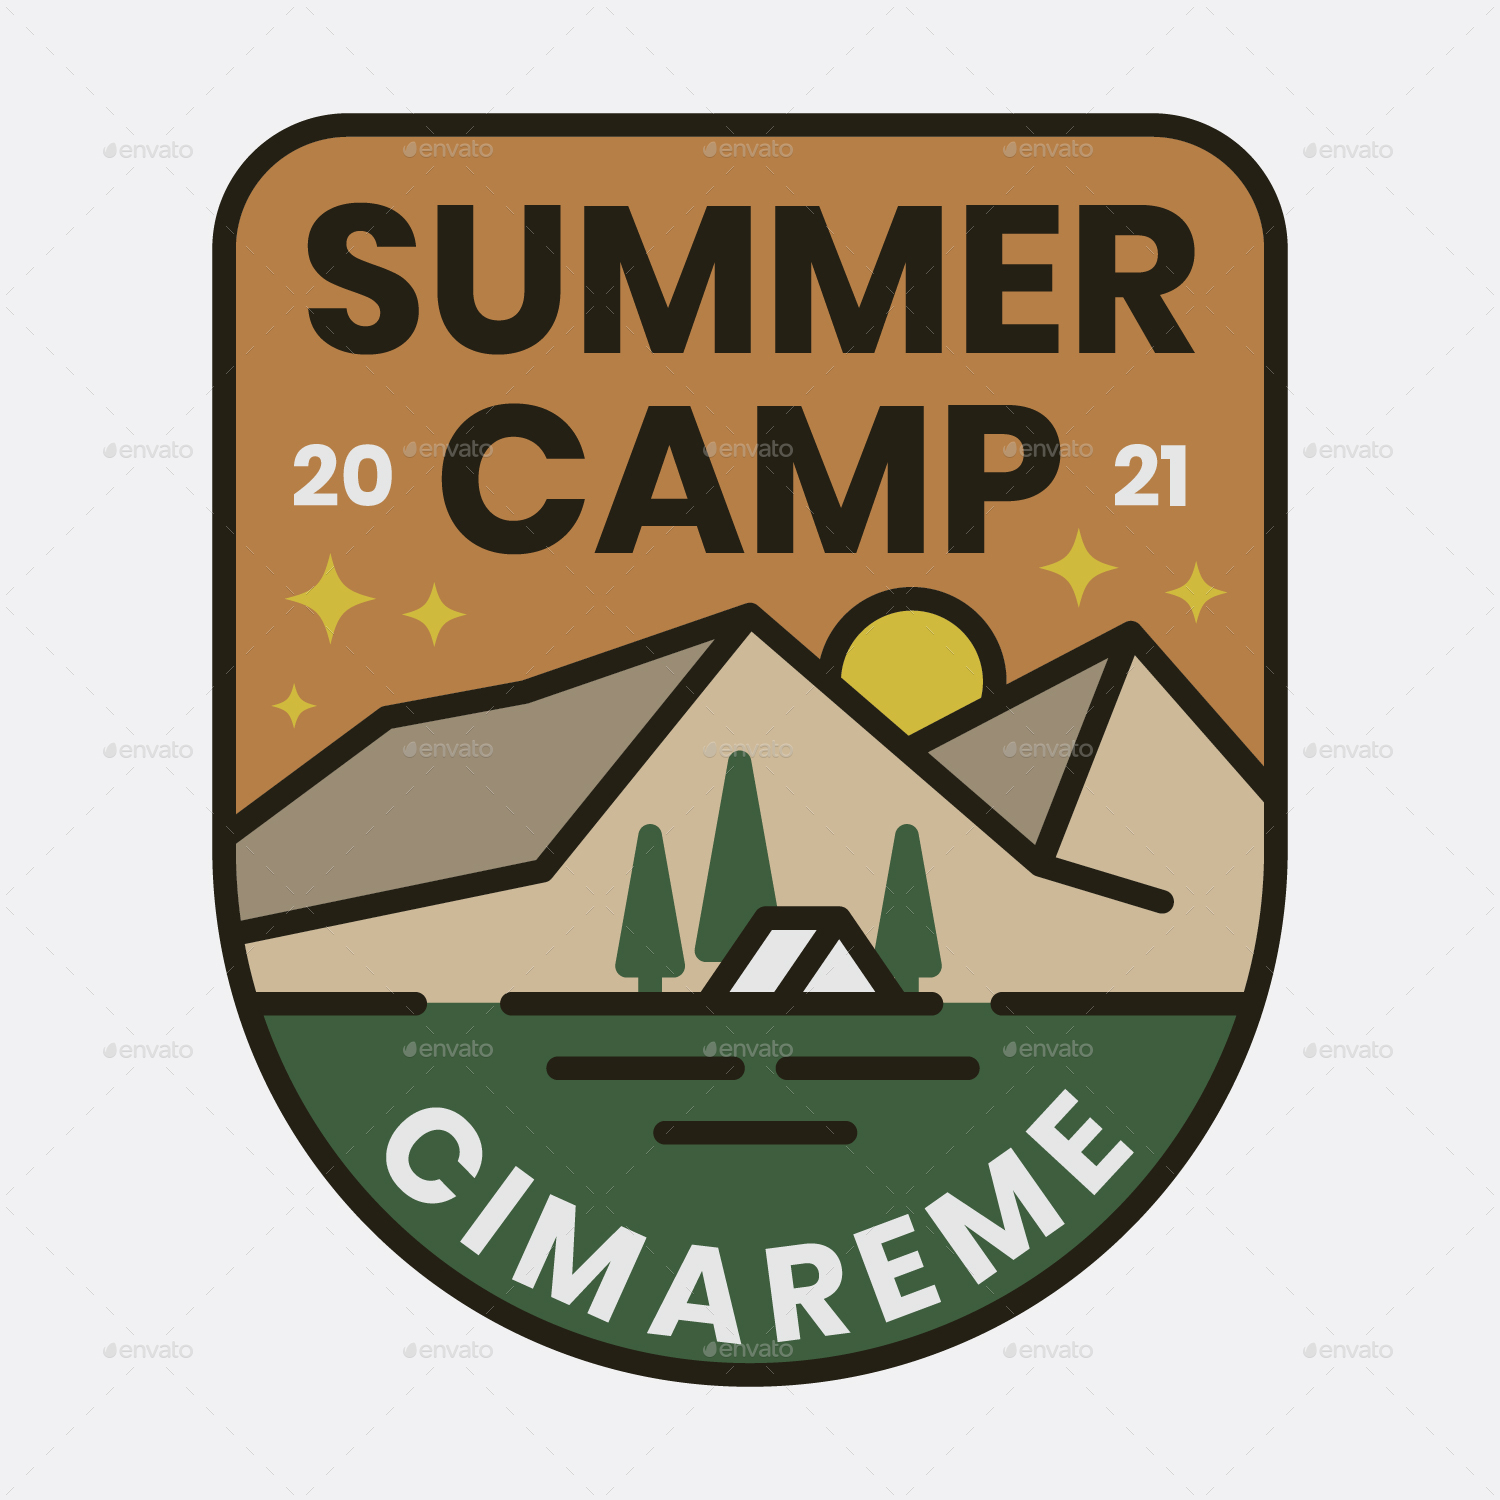 Download 6 Boy Scout Retro Summer Camp Badges By Bayurakhmadio Graphicriver